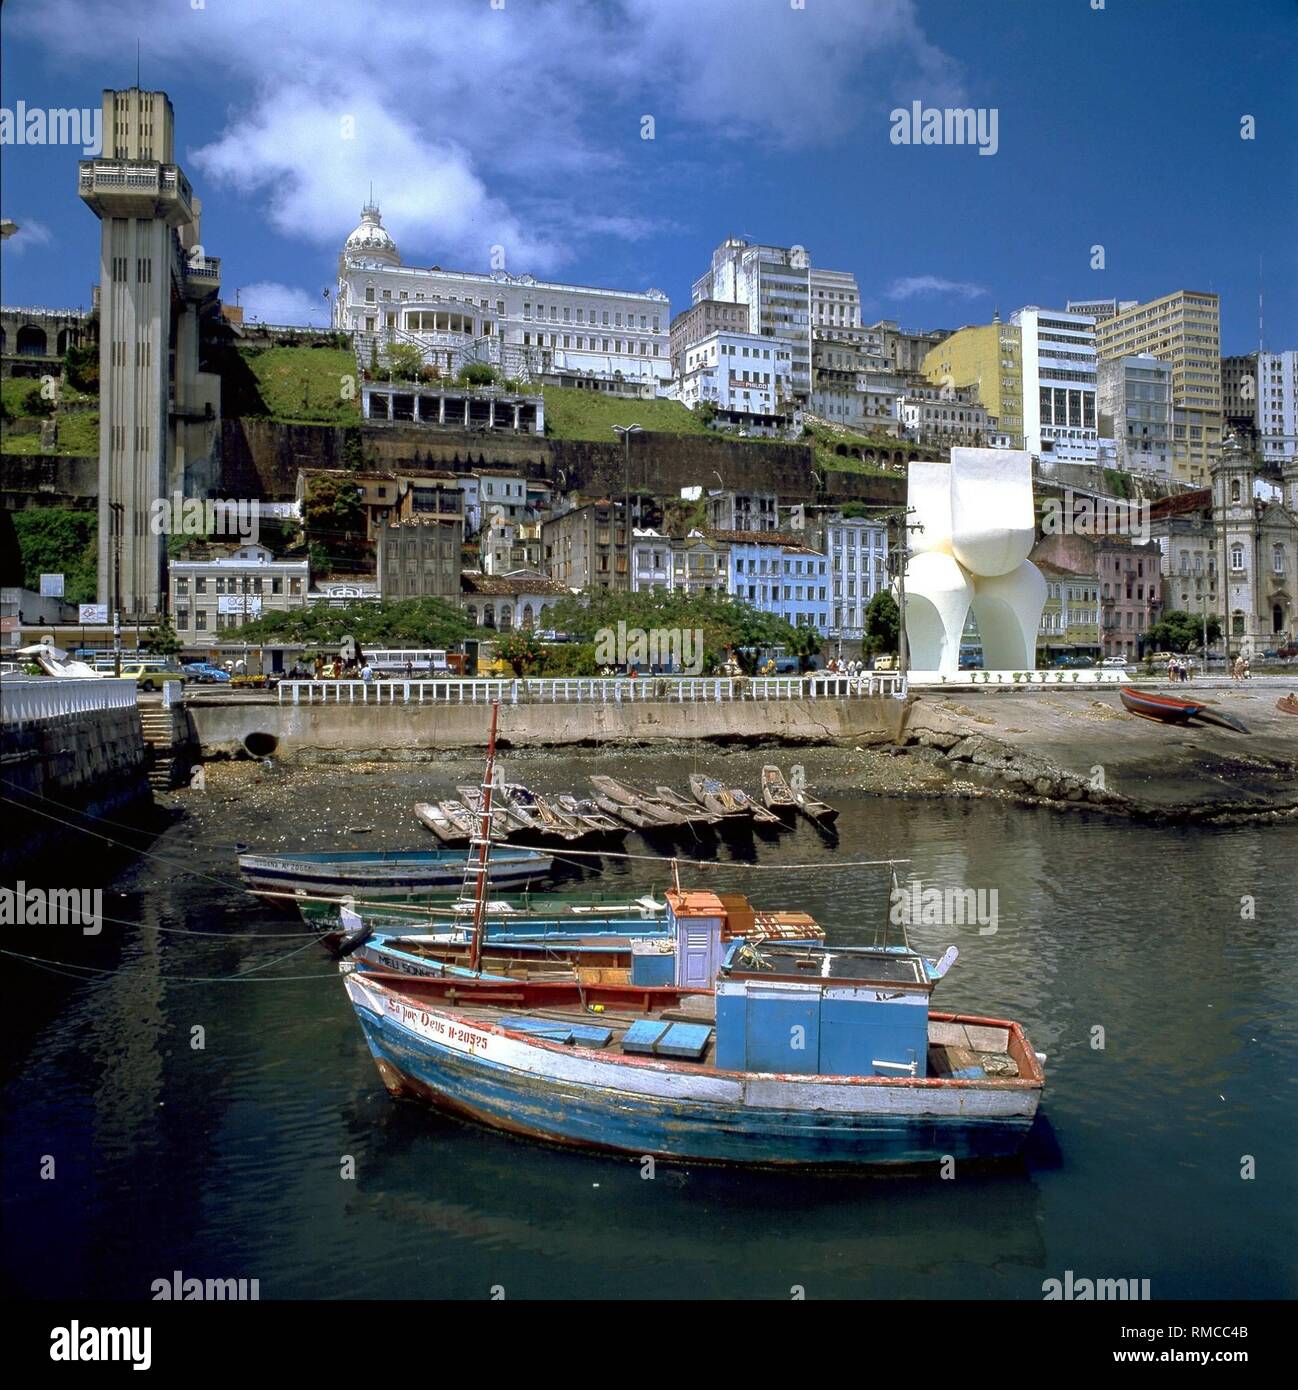 The old town of Salvador in Brazil, the fishing port and the urban elevator (left), which connects the Upper and Lower towns. Stock Photo